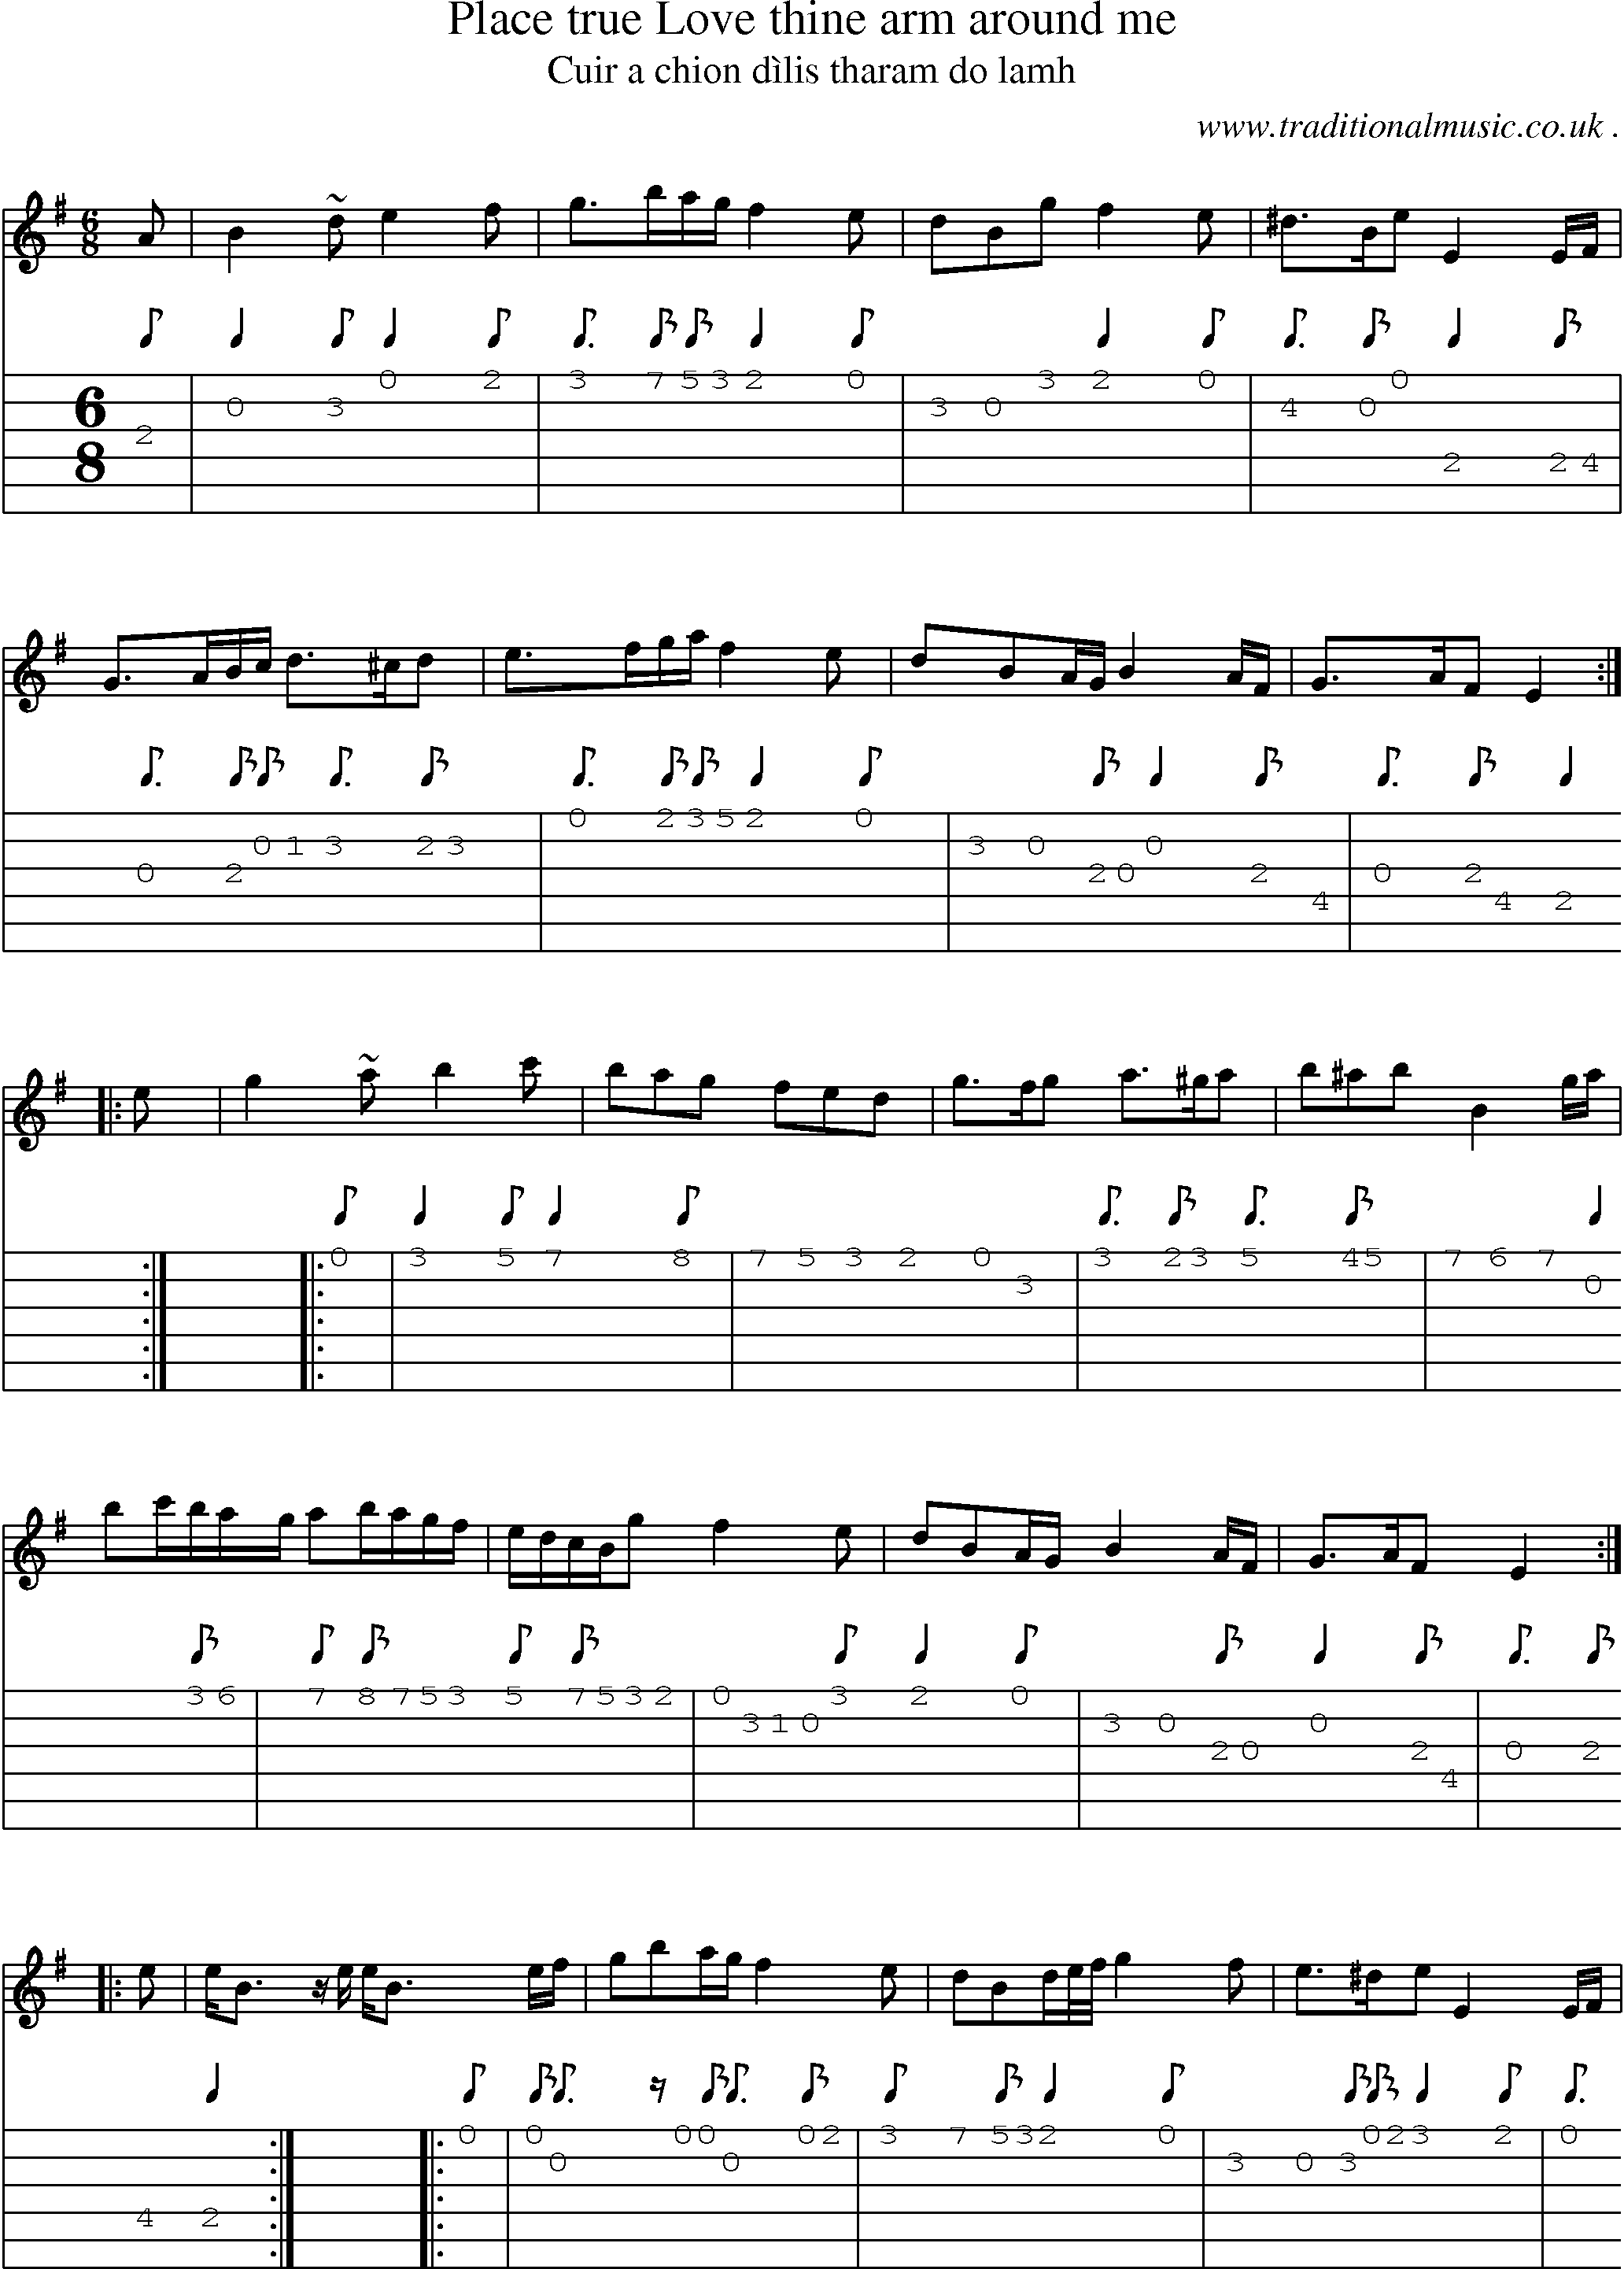 Sheet-music  score, Chords and Guitar Tabs for Place True Love Thine Arm Around Me